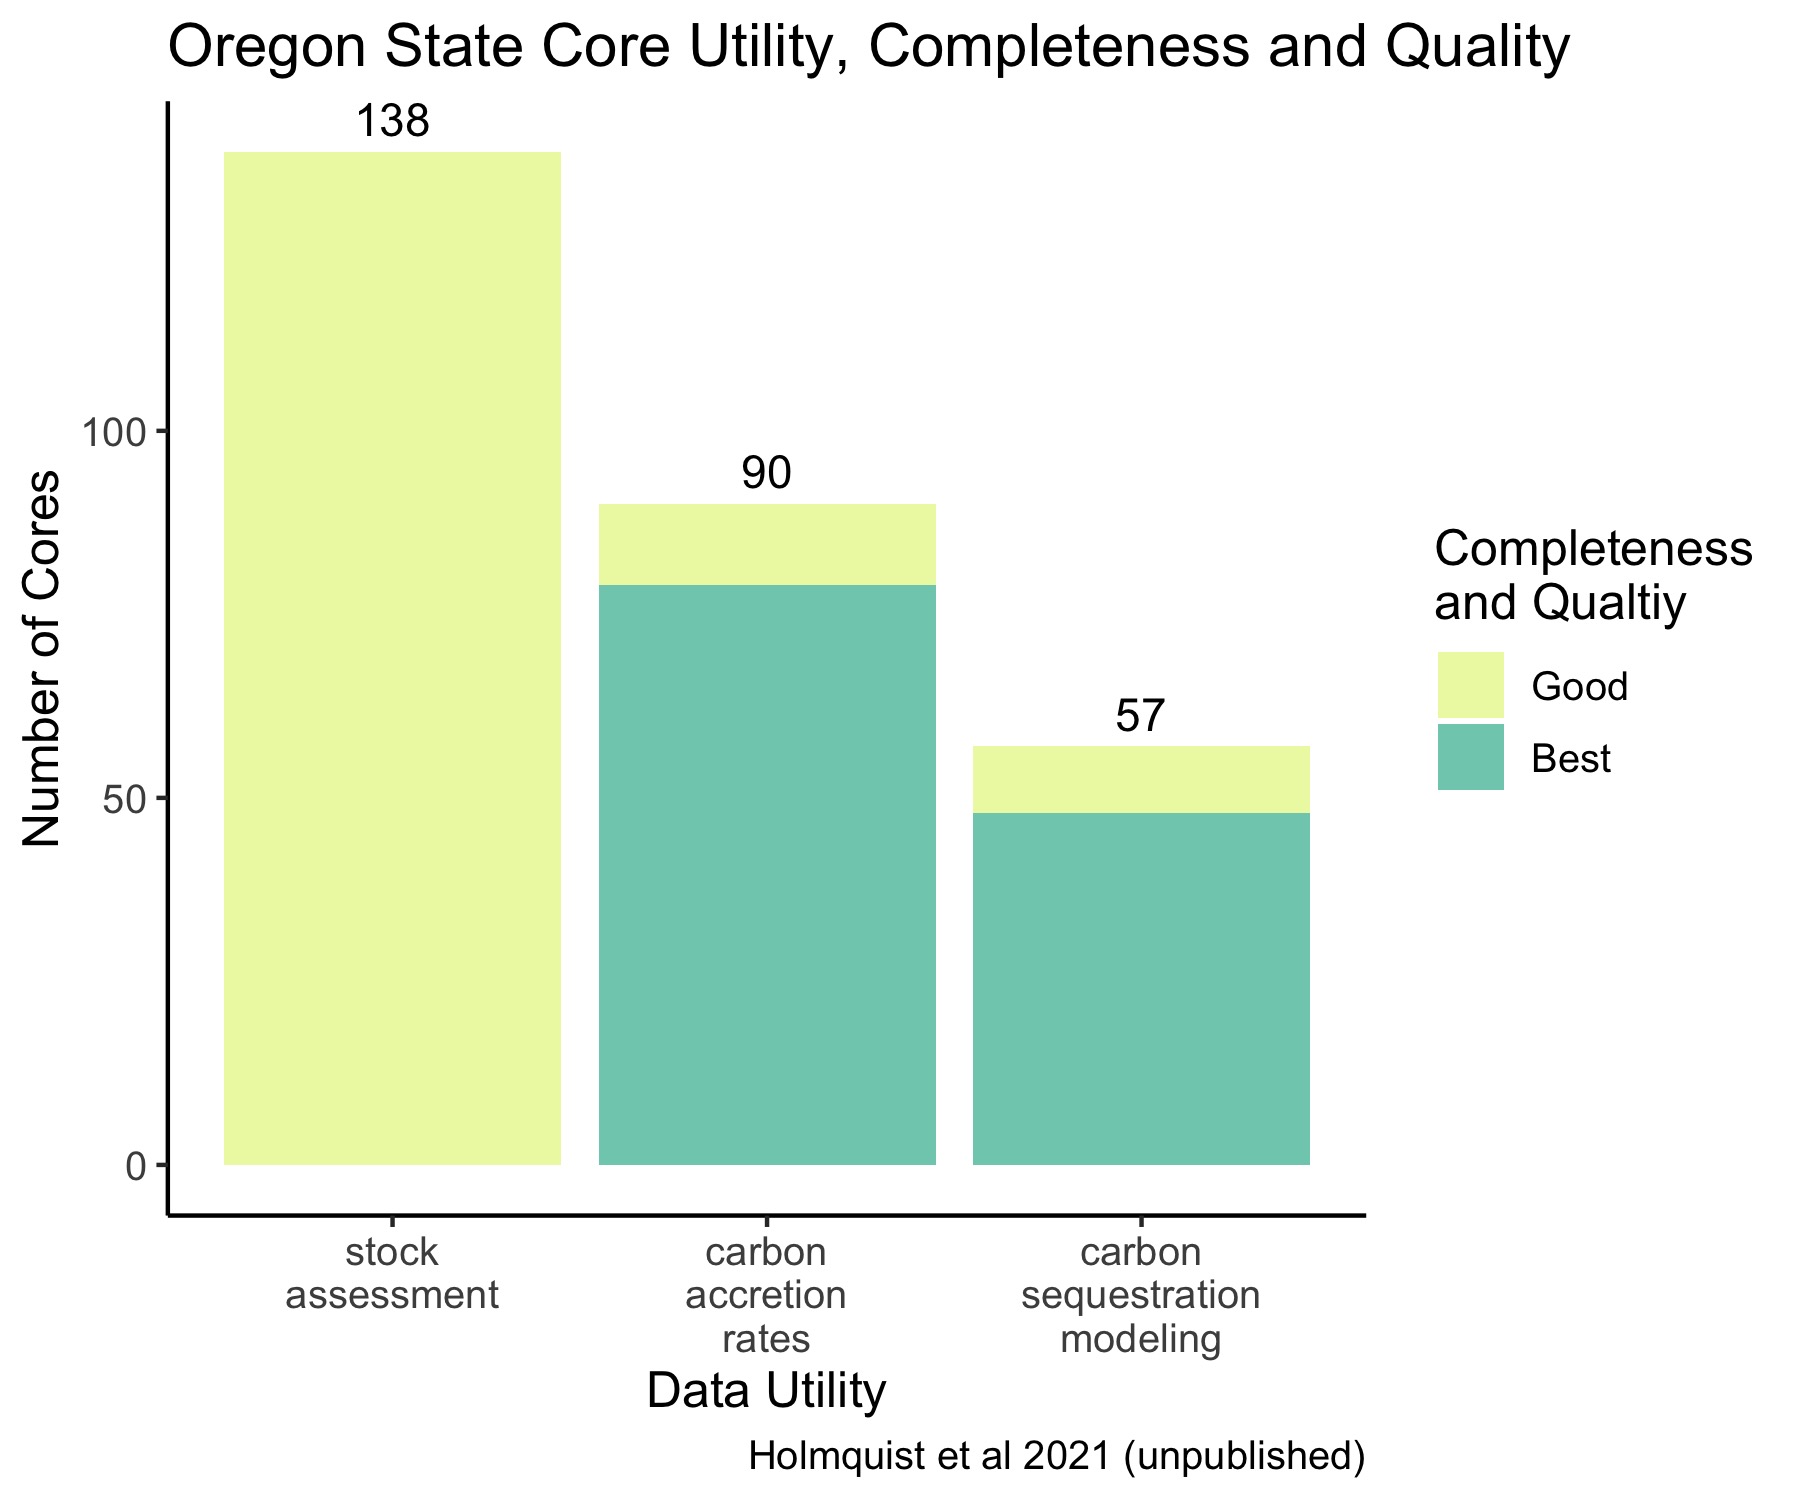 Oregon State Core Data Utility, Completeness, and Quality.